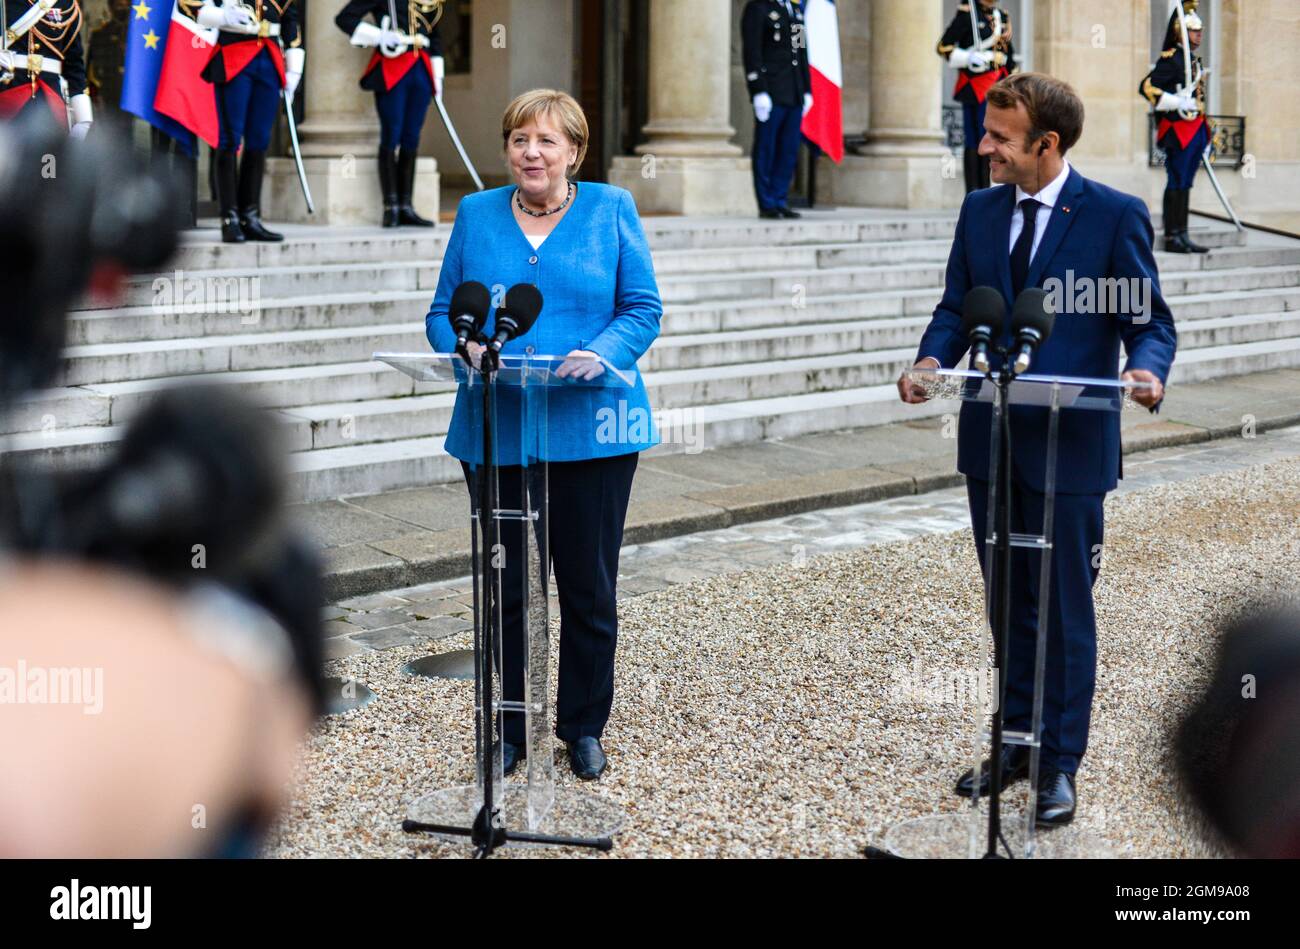 PARIS, FRANCE, 16 SEPTEMBER 2021. France’s President Emmanuel Macron speaks to the press as he welcomes Germany’s Chancellor Angela Merkel prior to a working dinner at the Elysee Palace. Credit: Amaury Paul / Medialys Images/Sipa USA Stock Photo